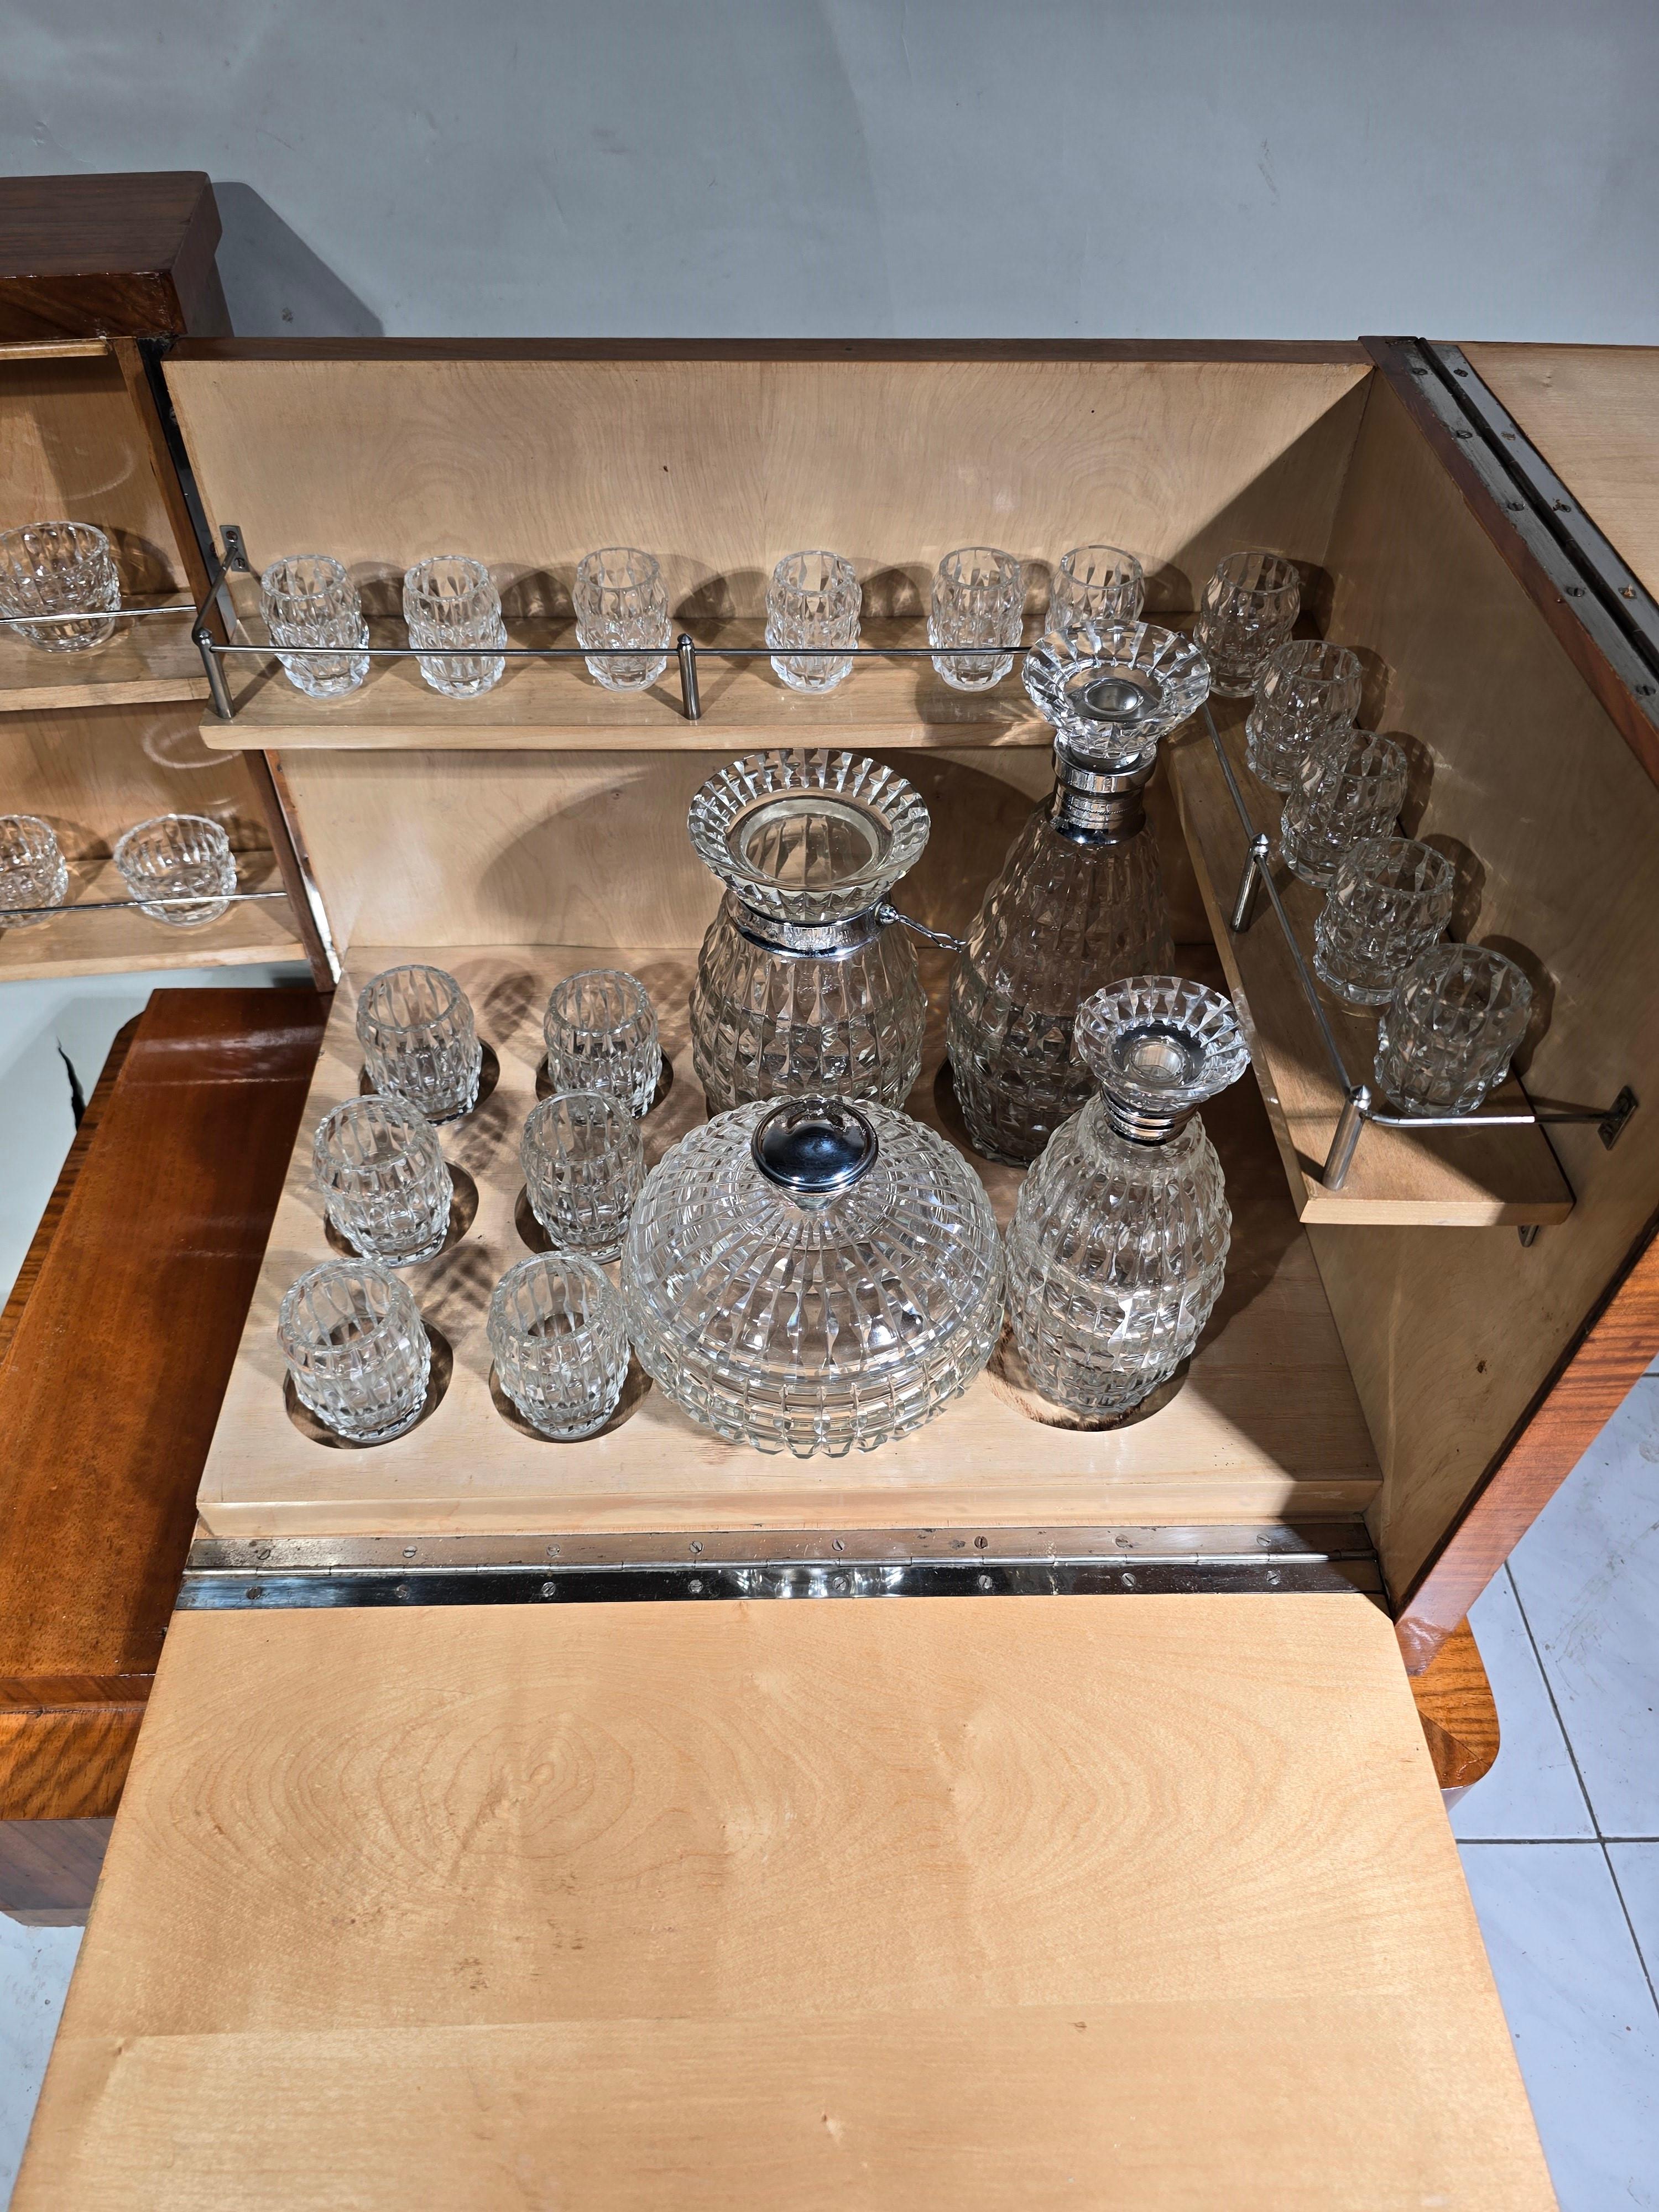 Add a touch of timeless elegance to your home with this stylish Art Deco bar cabinet from the 1920s. Crafted from exotic wood, this exquisite piece exudes sophistication and luxury.

Featuring a set of cut glassware including various containers and